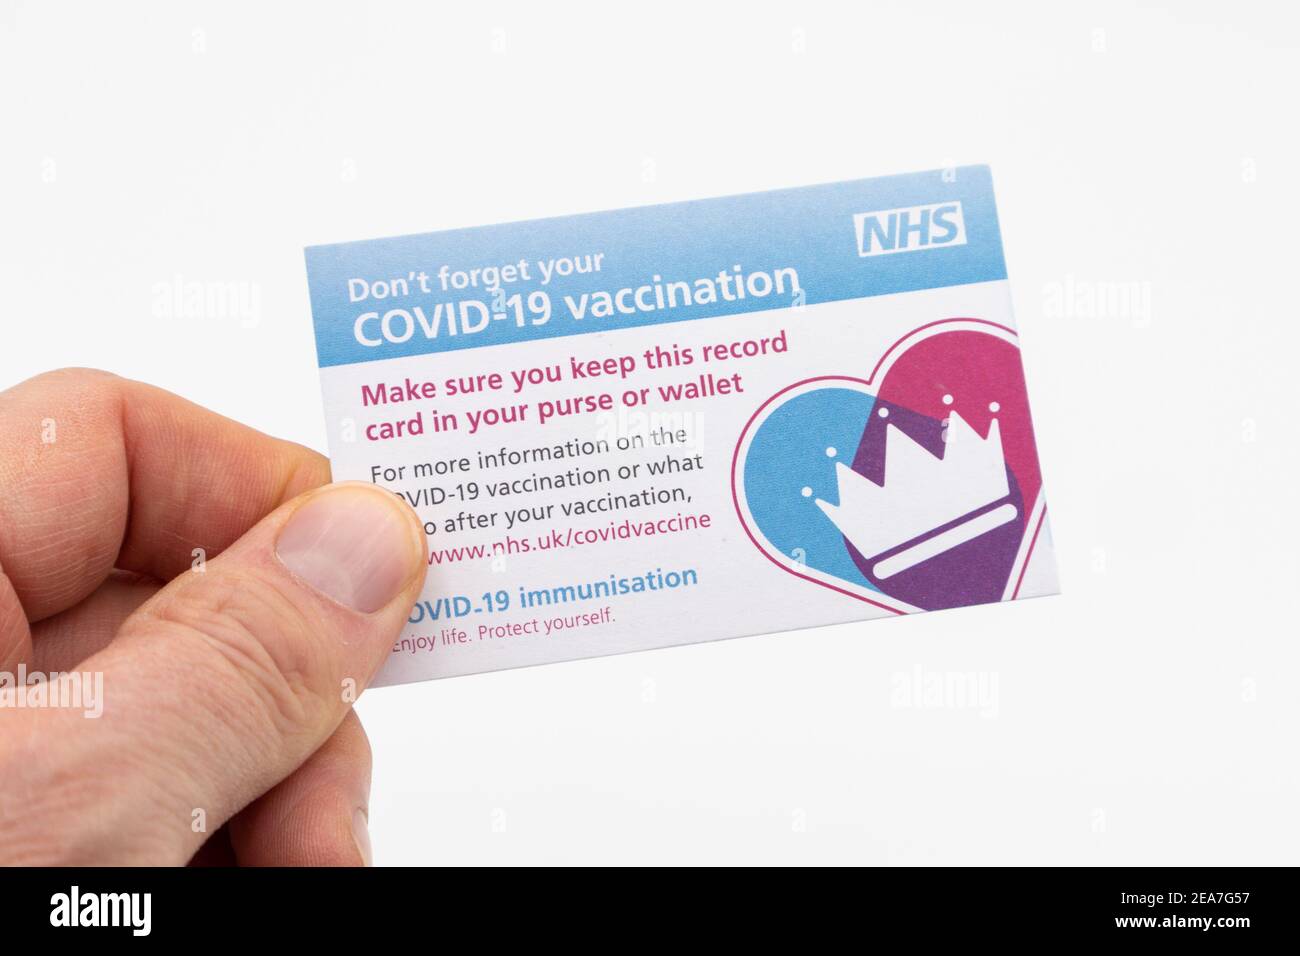 Ashford, Kent, UK. 8th Feb, 2021. A man in receipt of a covid 19 vaccination card with leaflet details for information of recipient. Photo Credit: PAL Media/Alamy Live News Stock Photo